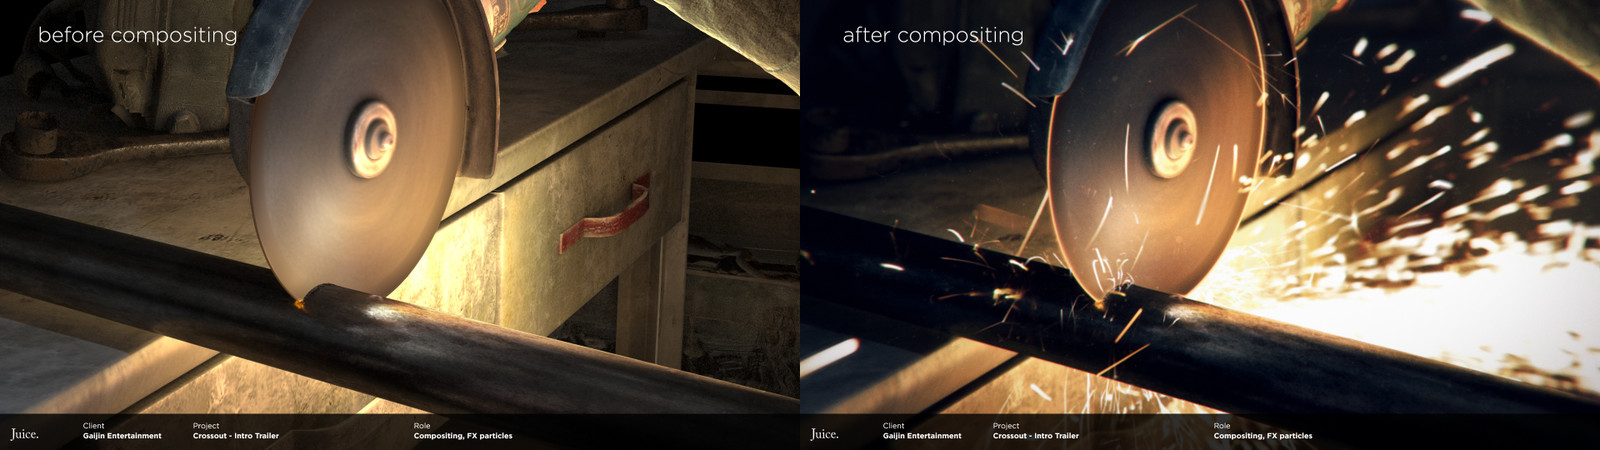 Before and after compositing